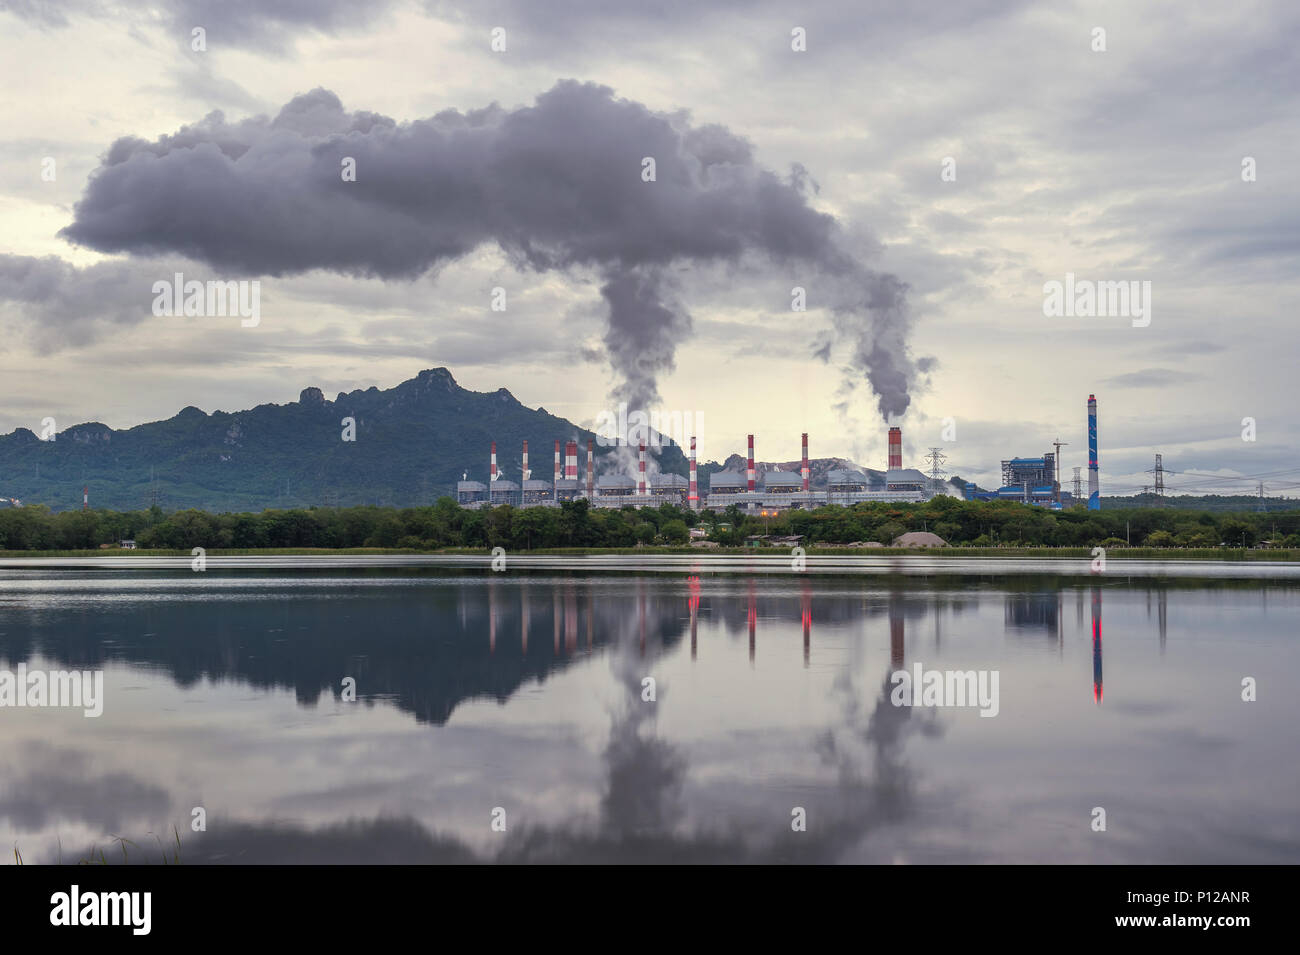 Industrial power plant with smokestack near the river. Stock Photo